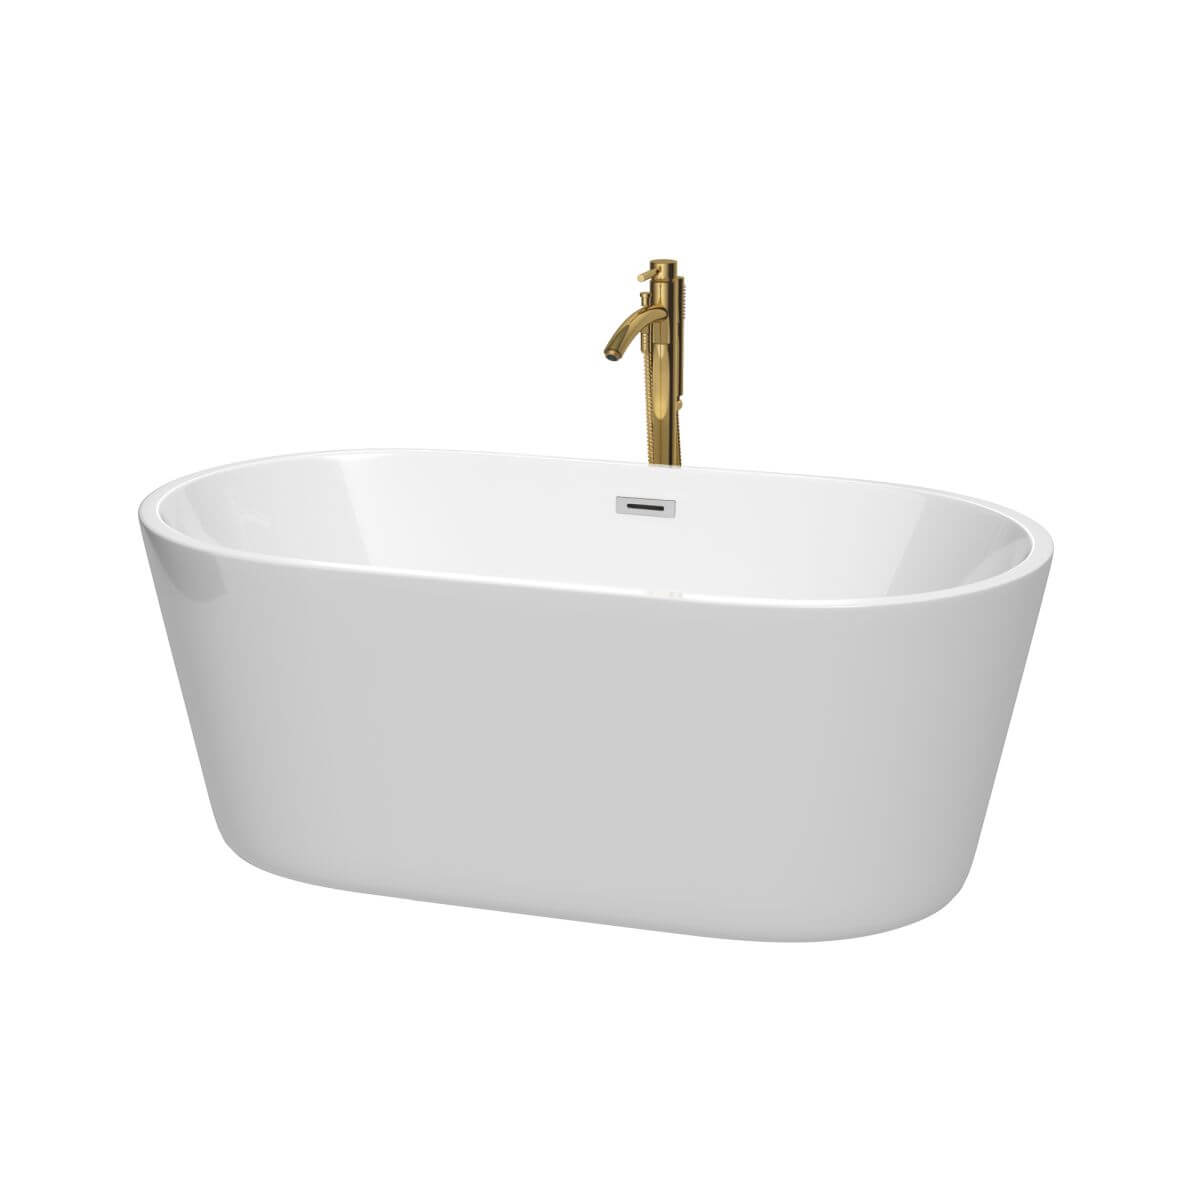 Wyndham Collection Carissa 60 inch Freestanding Bathtub in White with Polished Chrome Trim and Floor Mounted Faucet in Brushed Gold - WCOBT101260PCATPGD